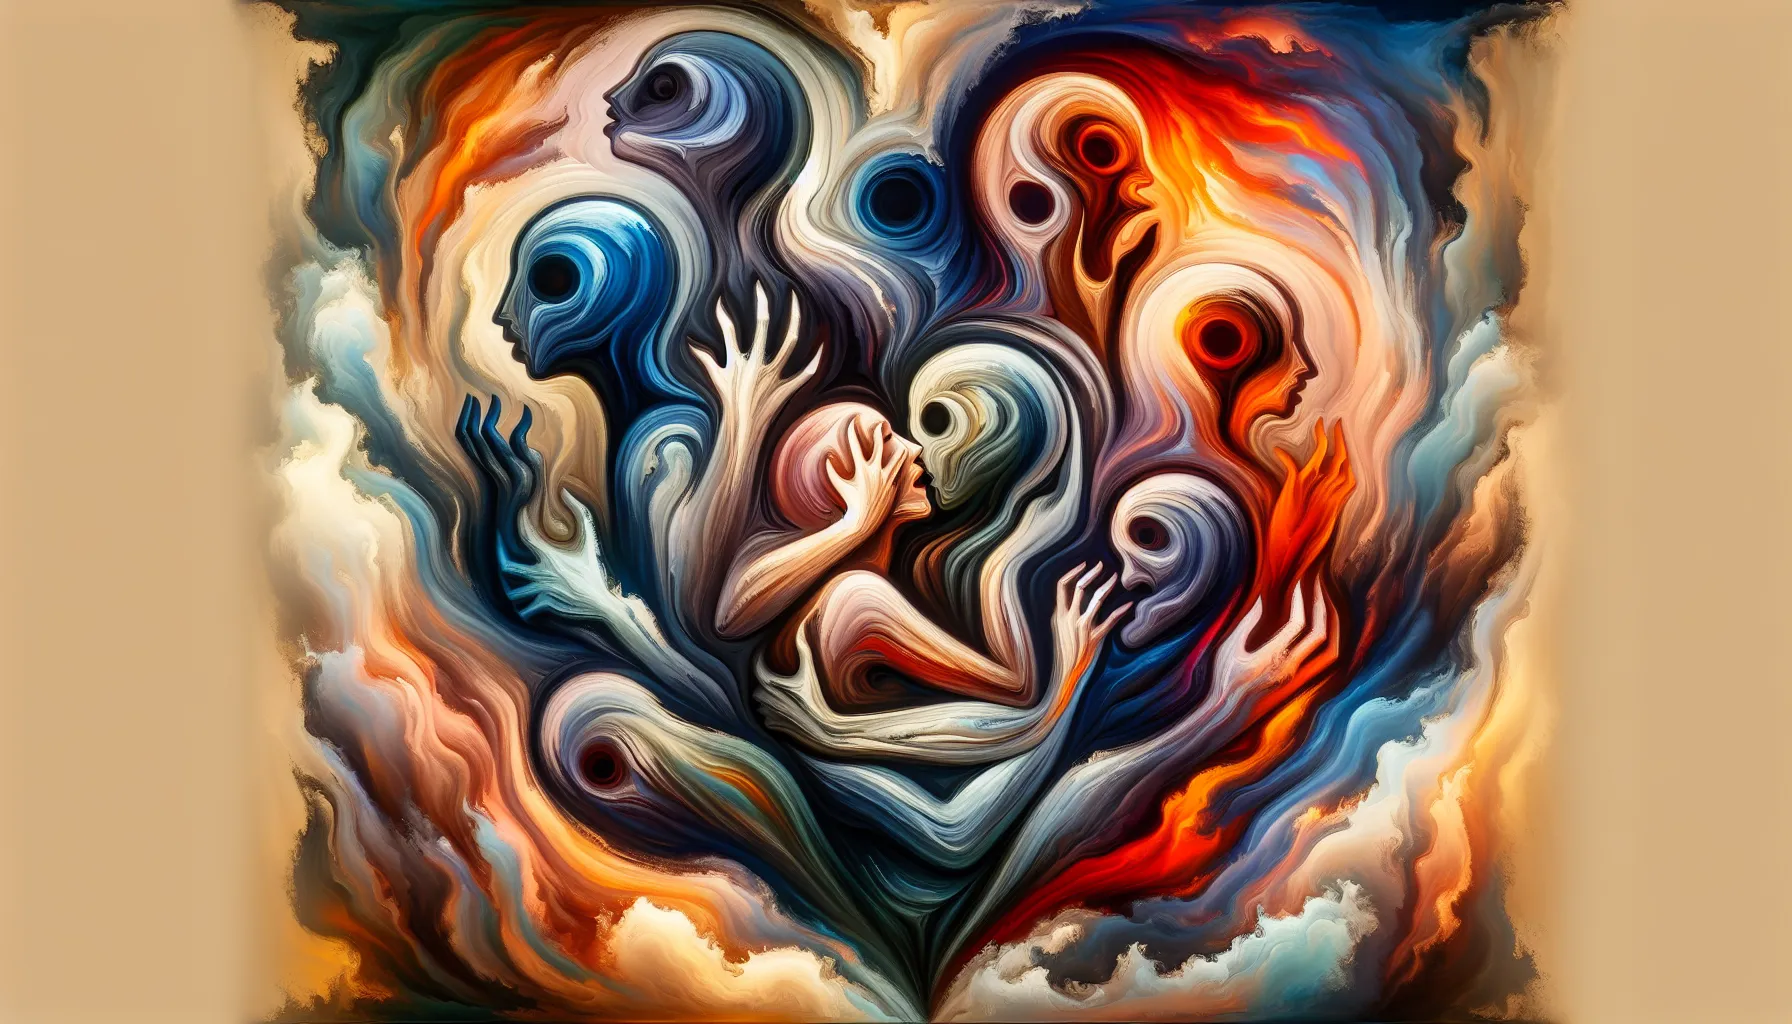 <strong>Emotional Tangle:</strong> The vibrant interplay of hues in this image mirrors the inner turmoil of jealousy, a dance of passion and fear that can both protect and peril love's delicate balance.